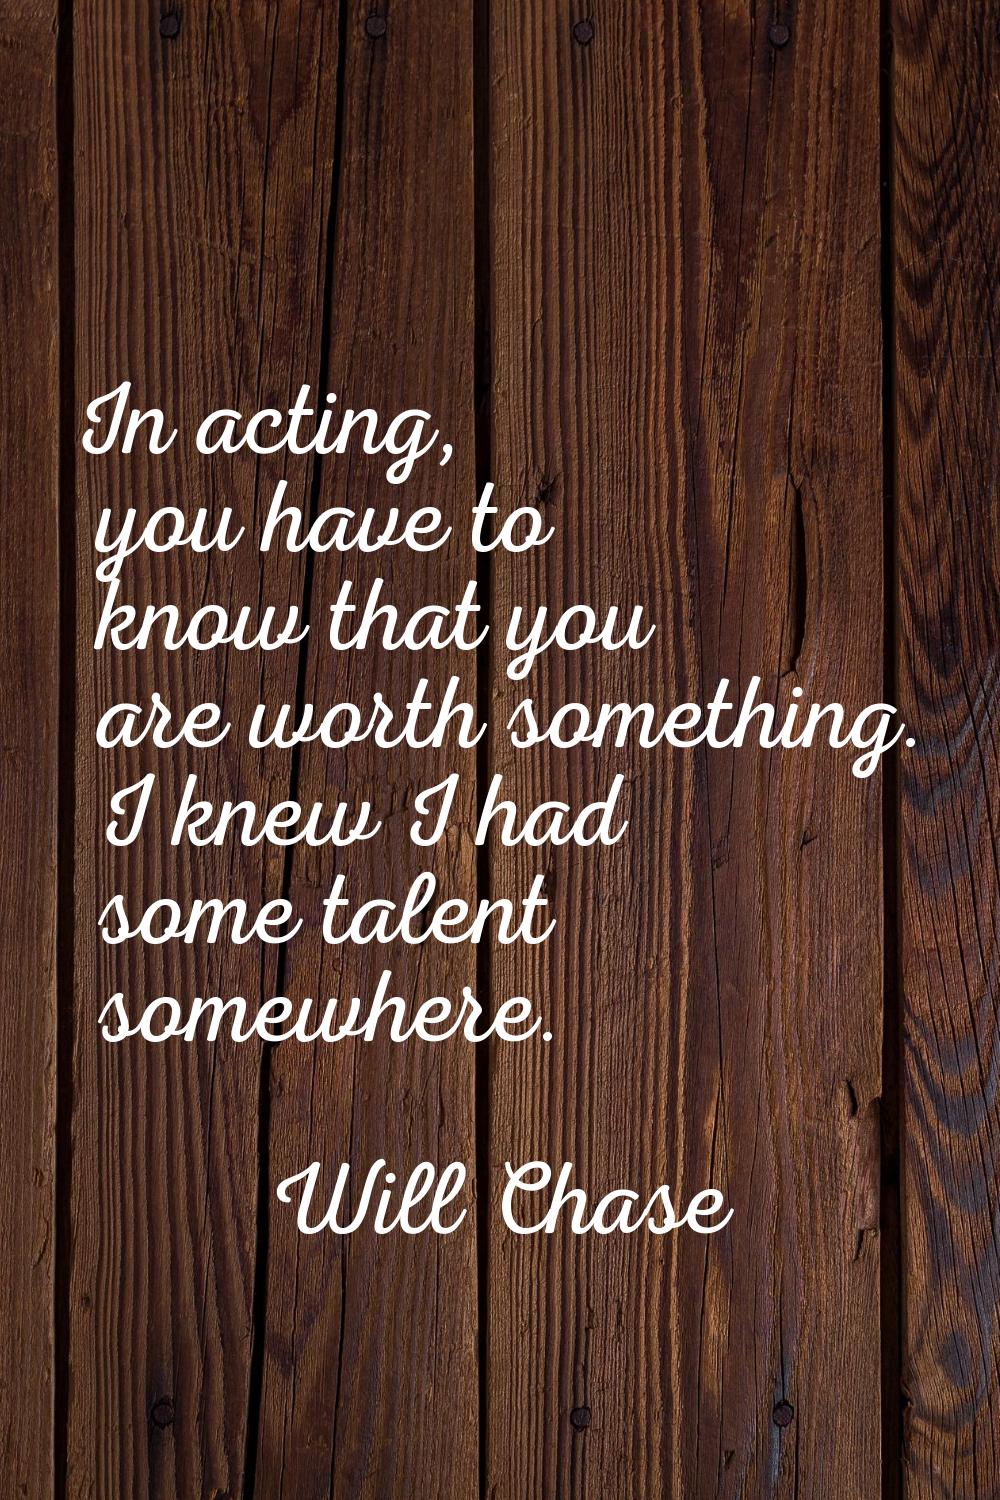 In acting, you have to know that you are worth something. I knew I had some talent somewhere.